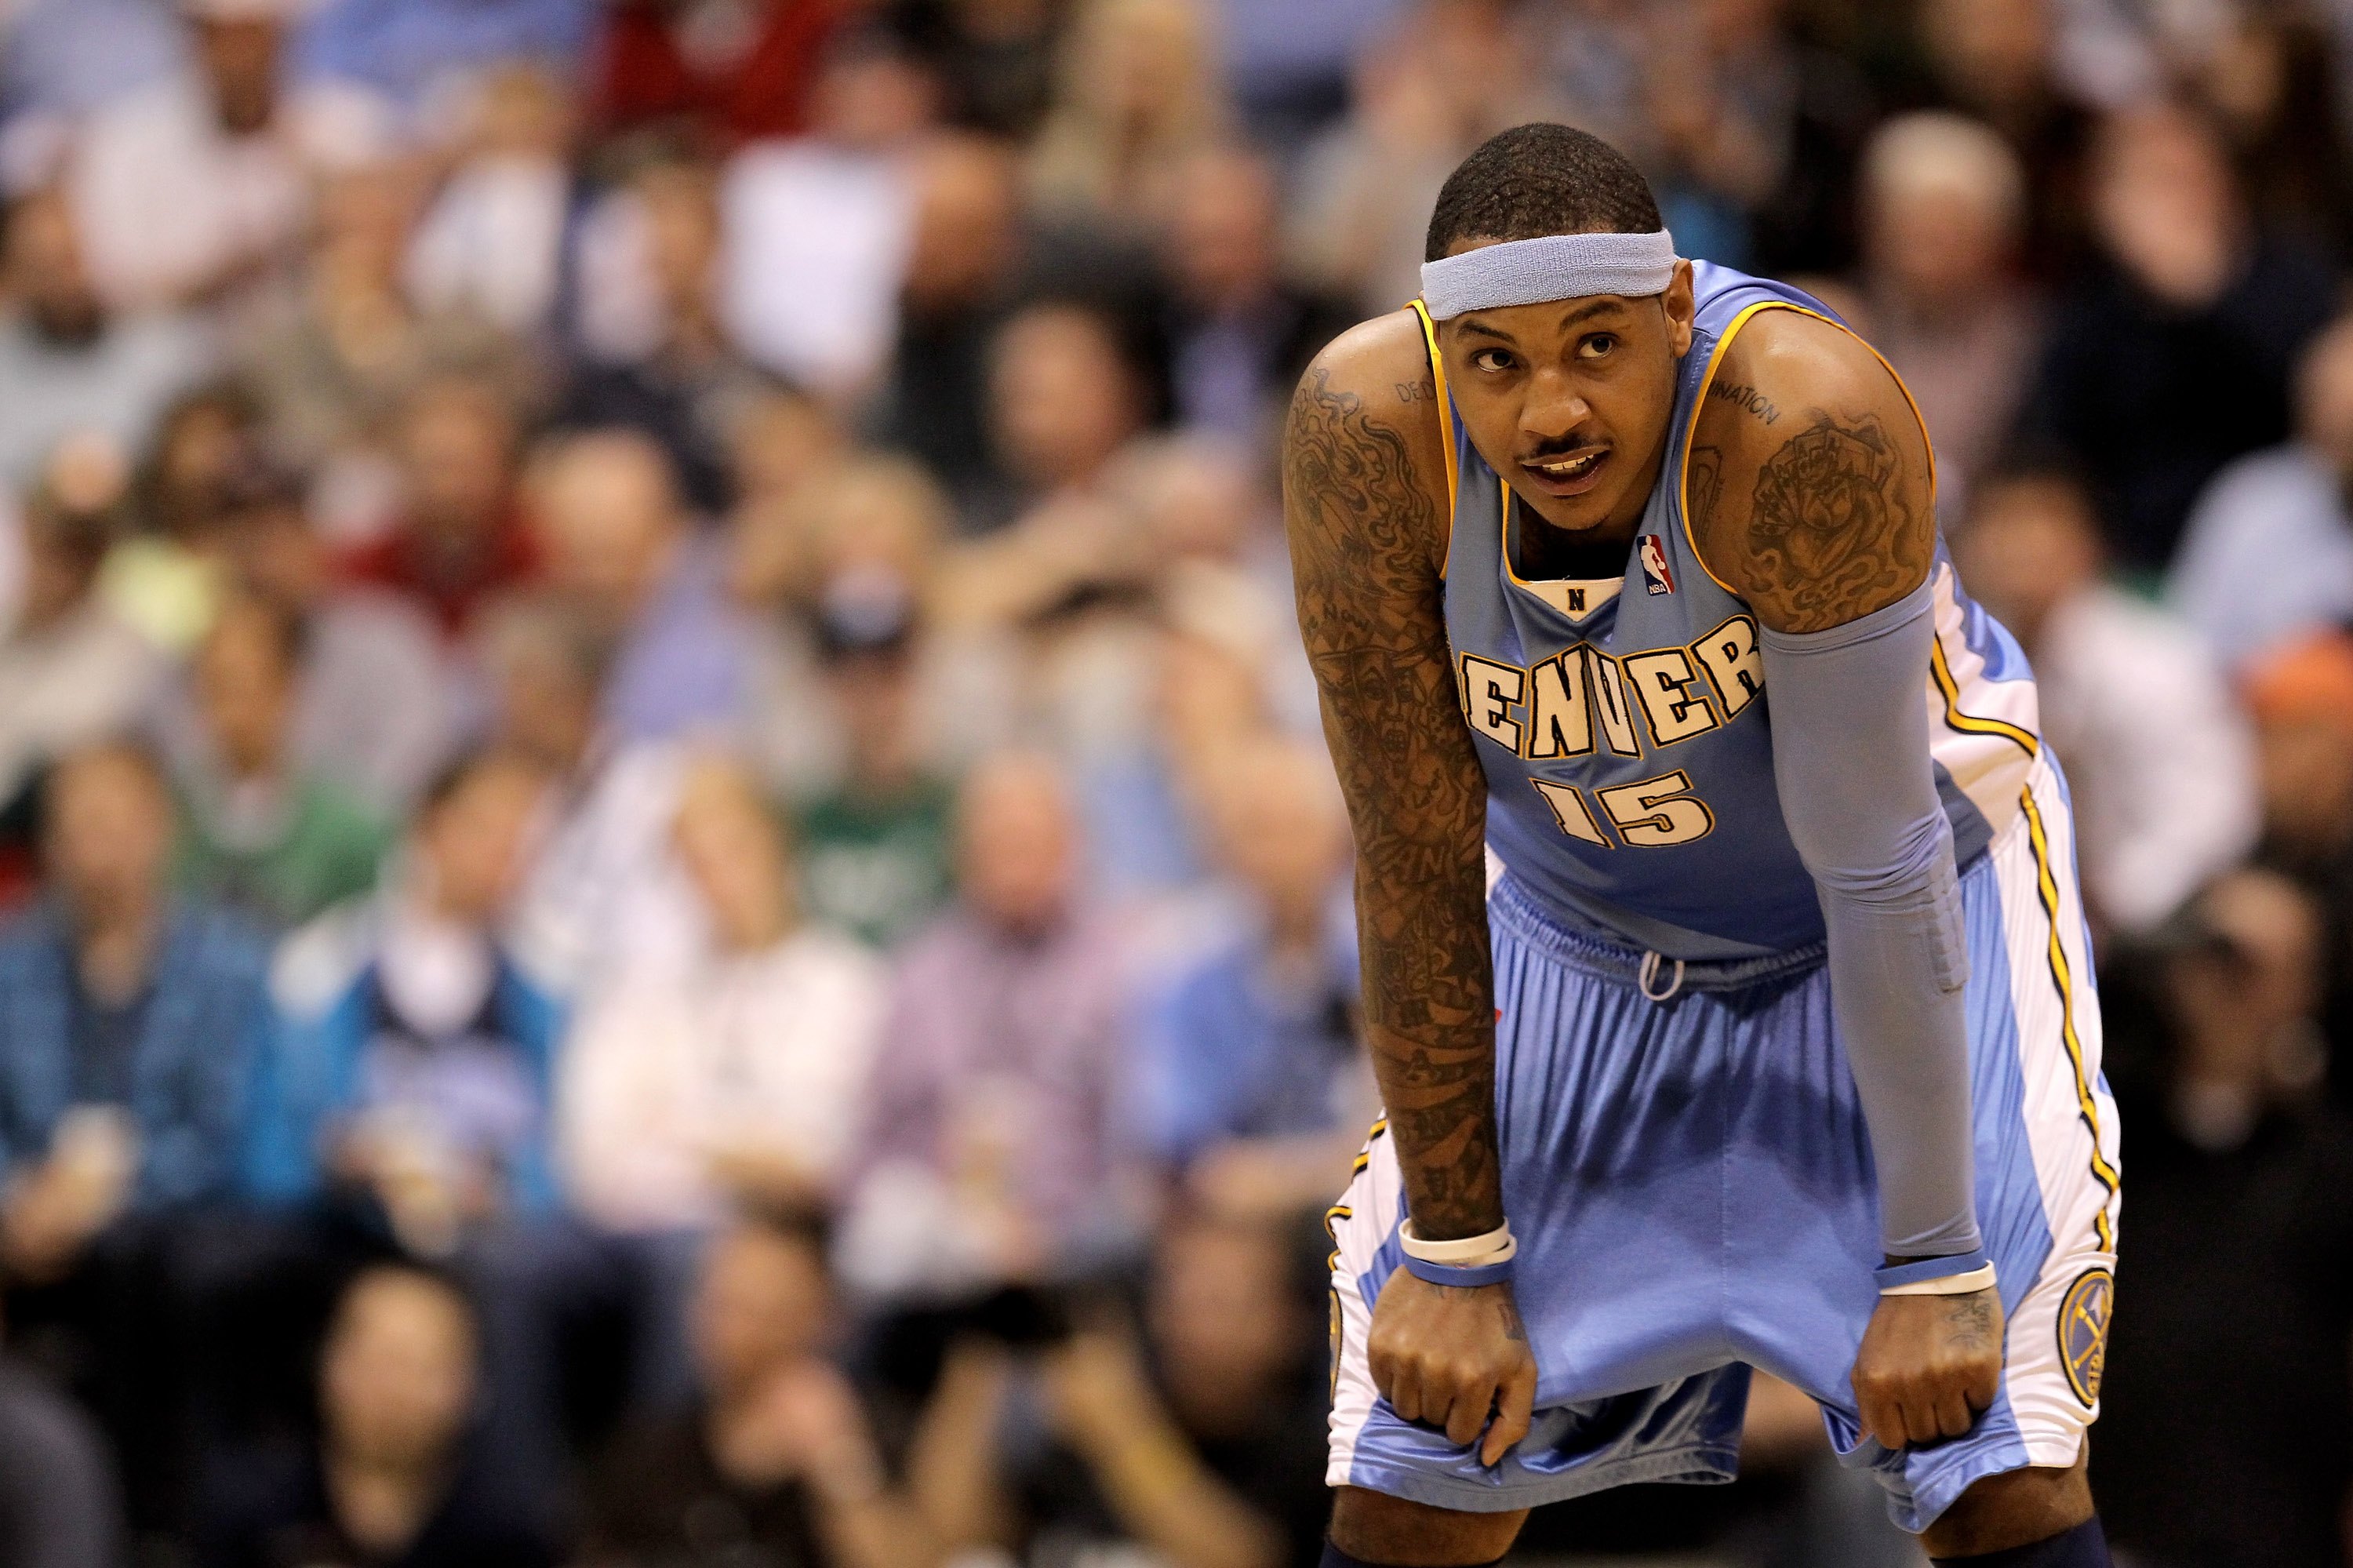 Carmelo Anthony of the Denver Nuggets stands on the court during